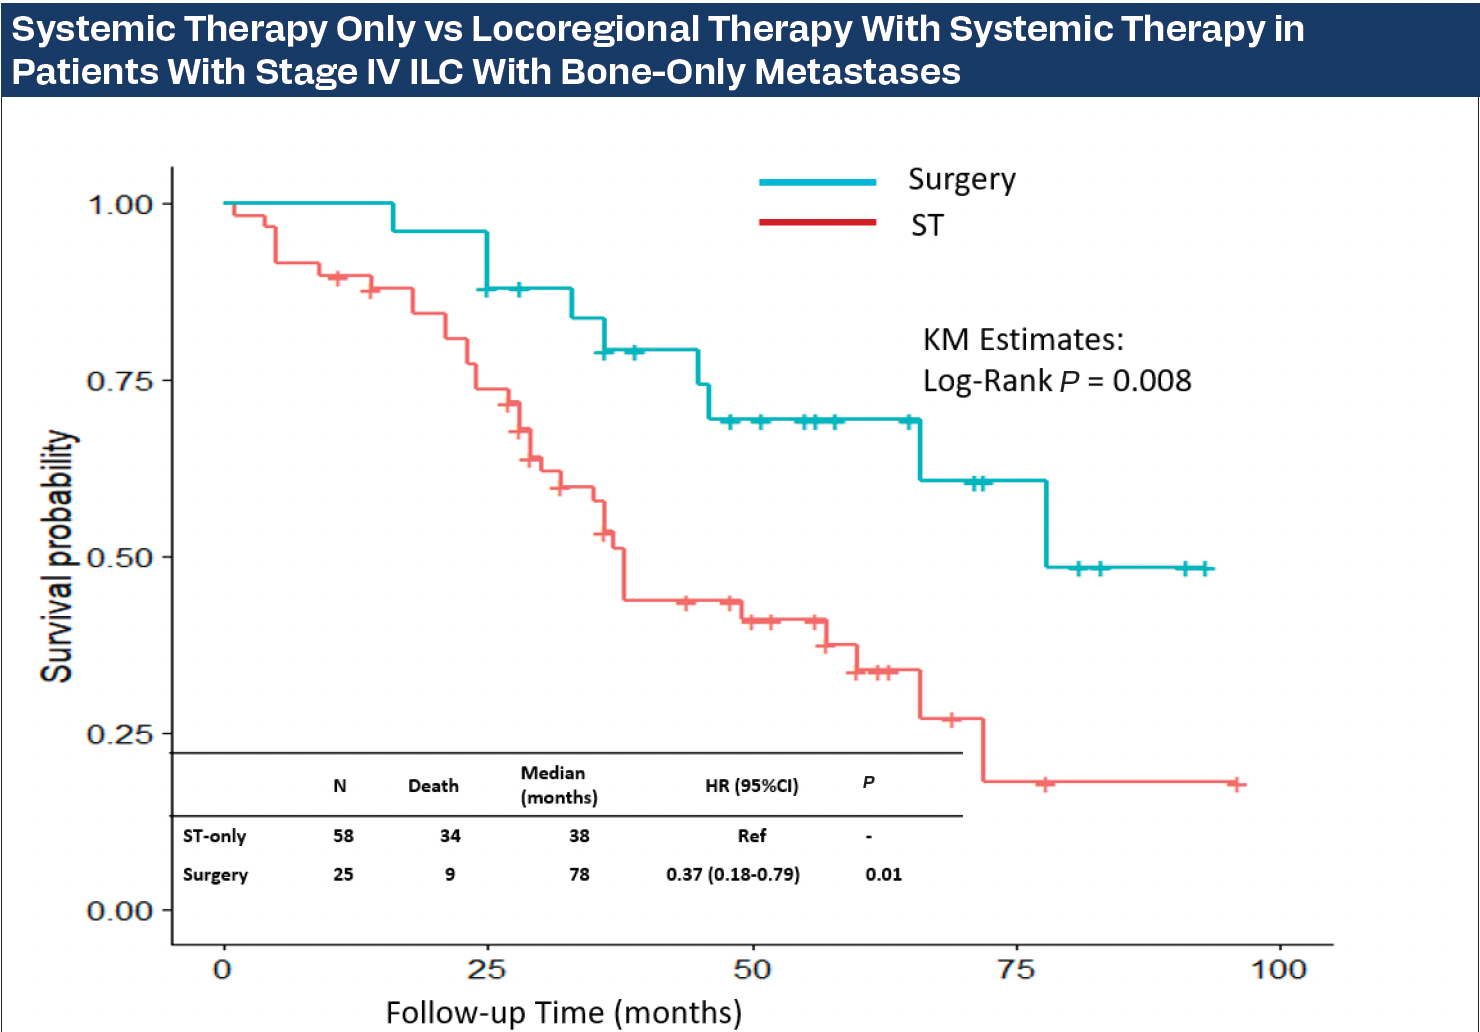 Systemic Therapy Only vs Locoregional Therapy With Systemic Therapy in Patients With Stage IV ILC With Bone-Only Metastases